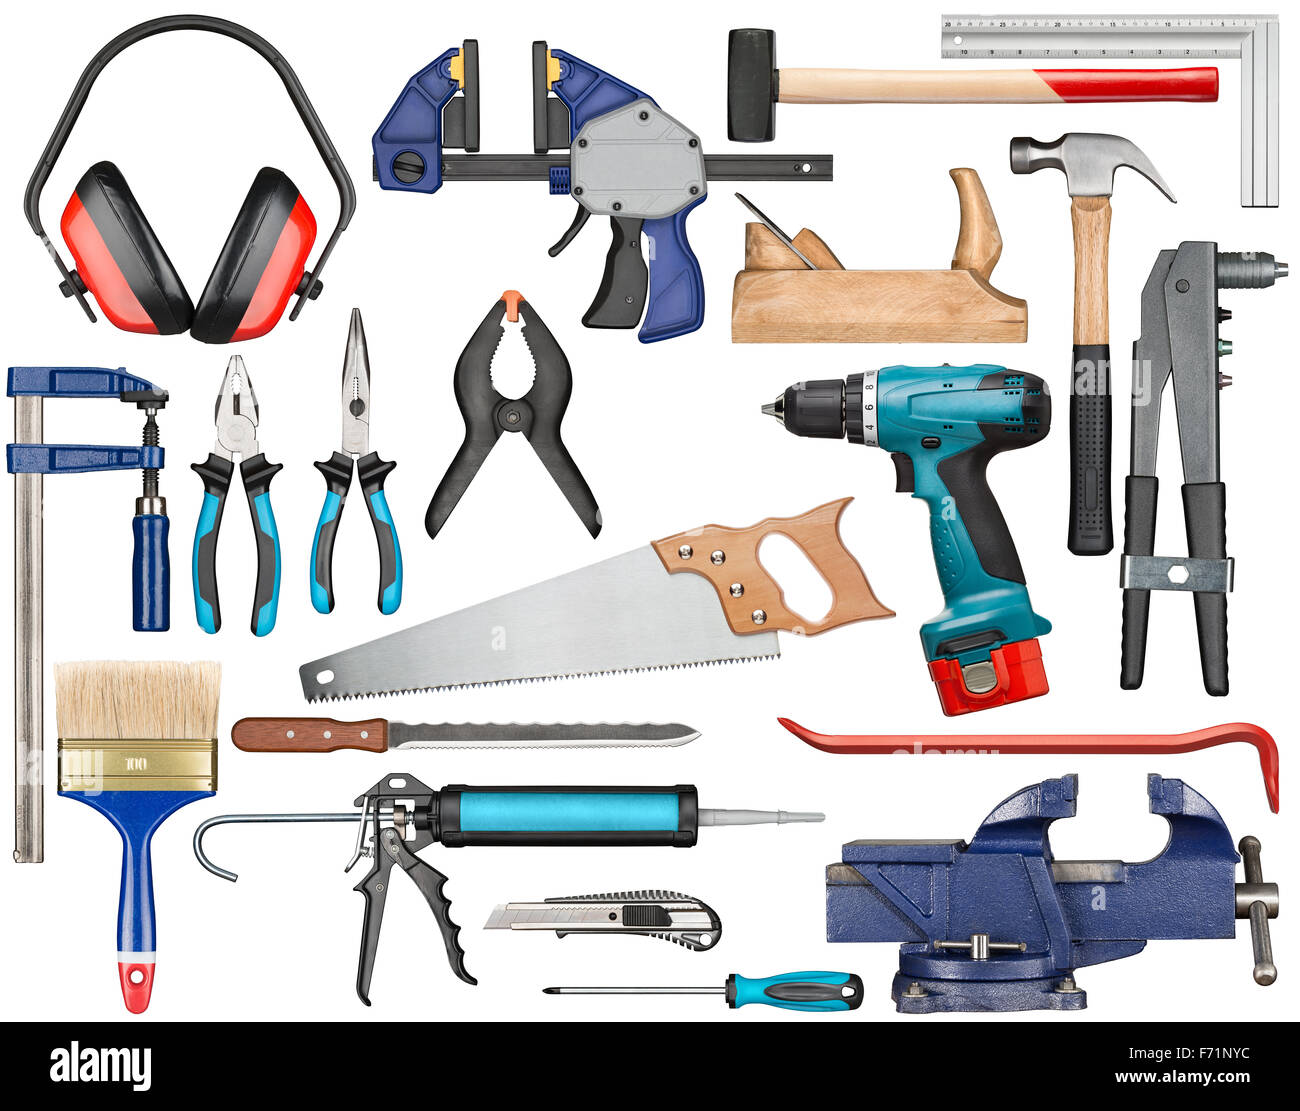 Set of various isolated hand tools for manual work. Stock Photo